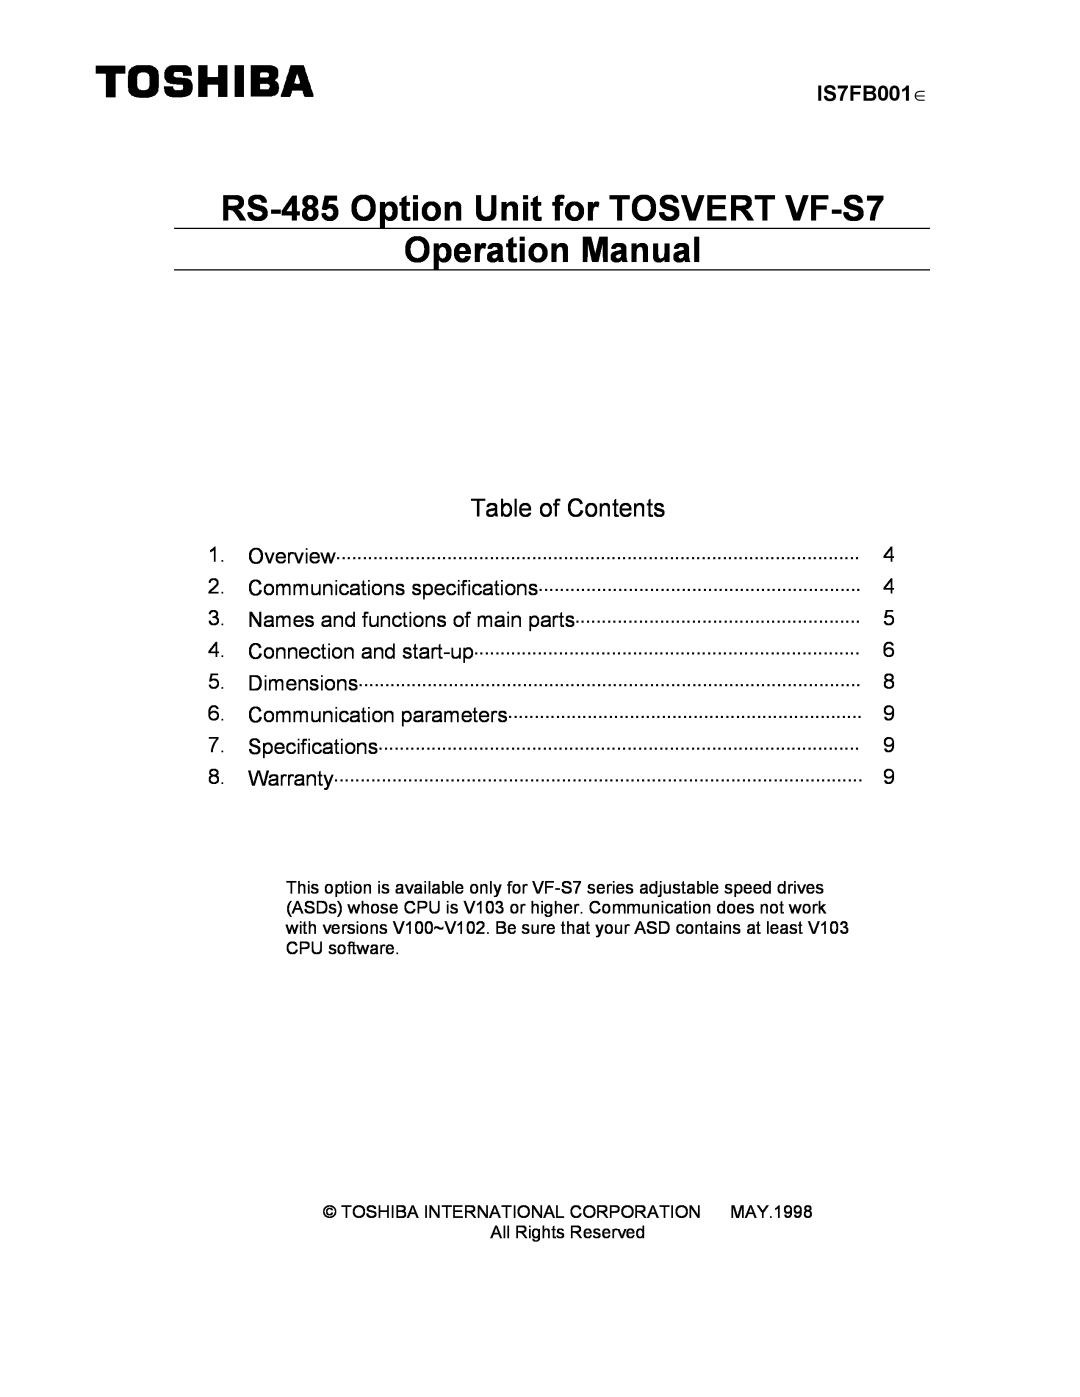 Toshiba operation manual RS-485 Option Unit for TOSVERT VF-S7 Operation Manual, Table of Contents, IS7FB001∈ 